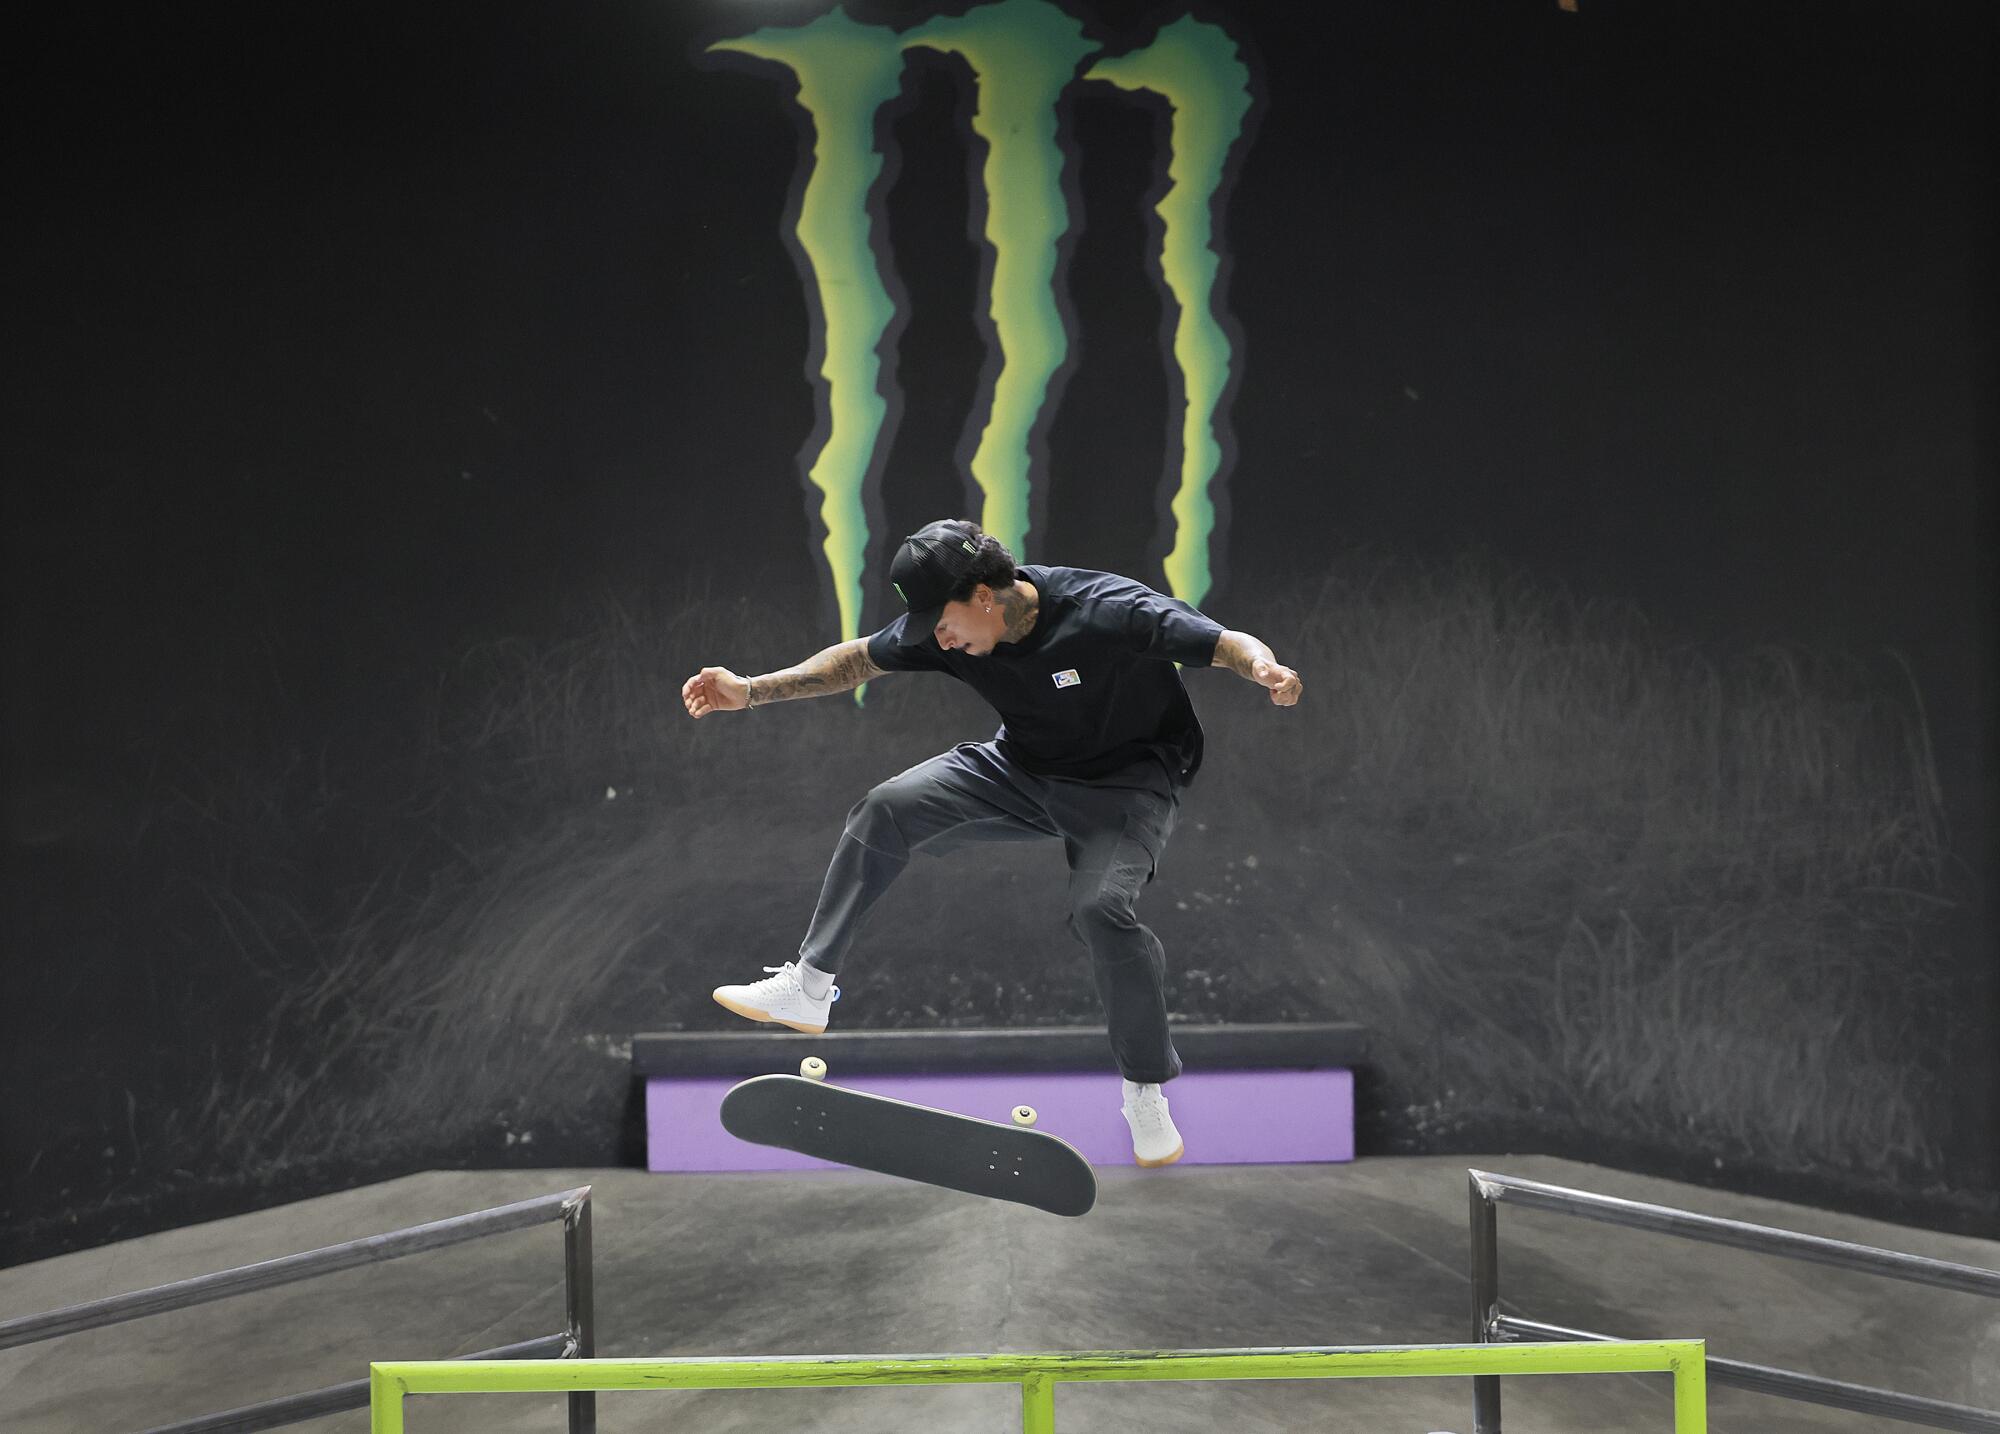 Nyjah Huston says he learned lessons from his seventh-place finish at the Tokyo Olympics.